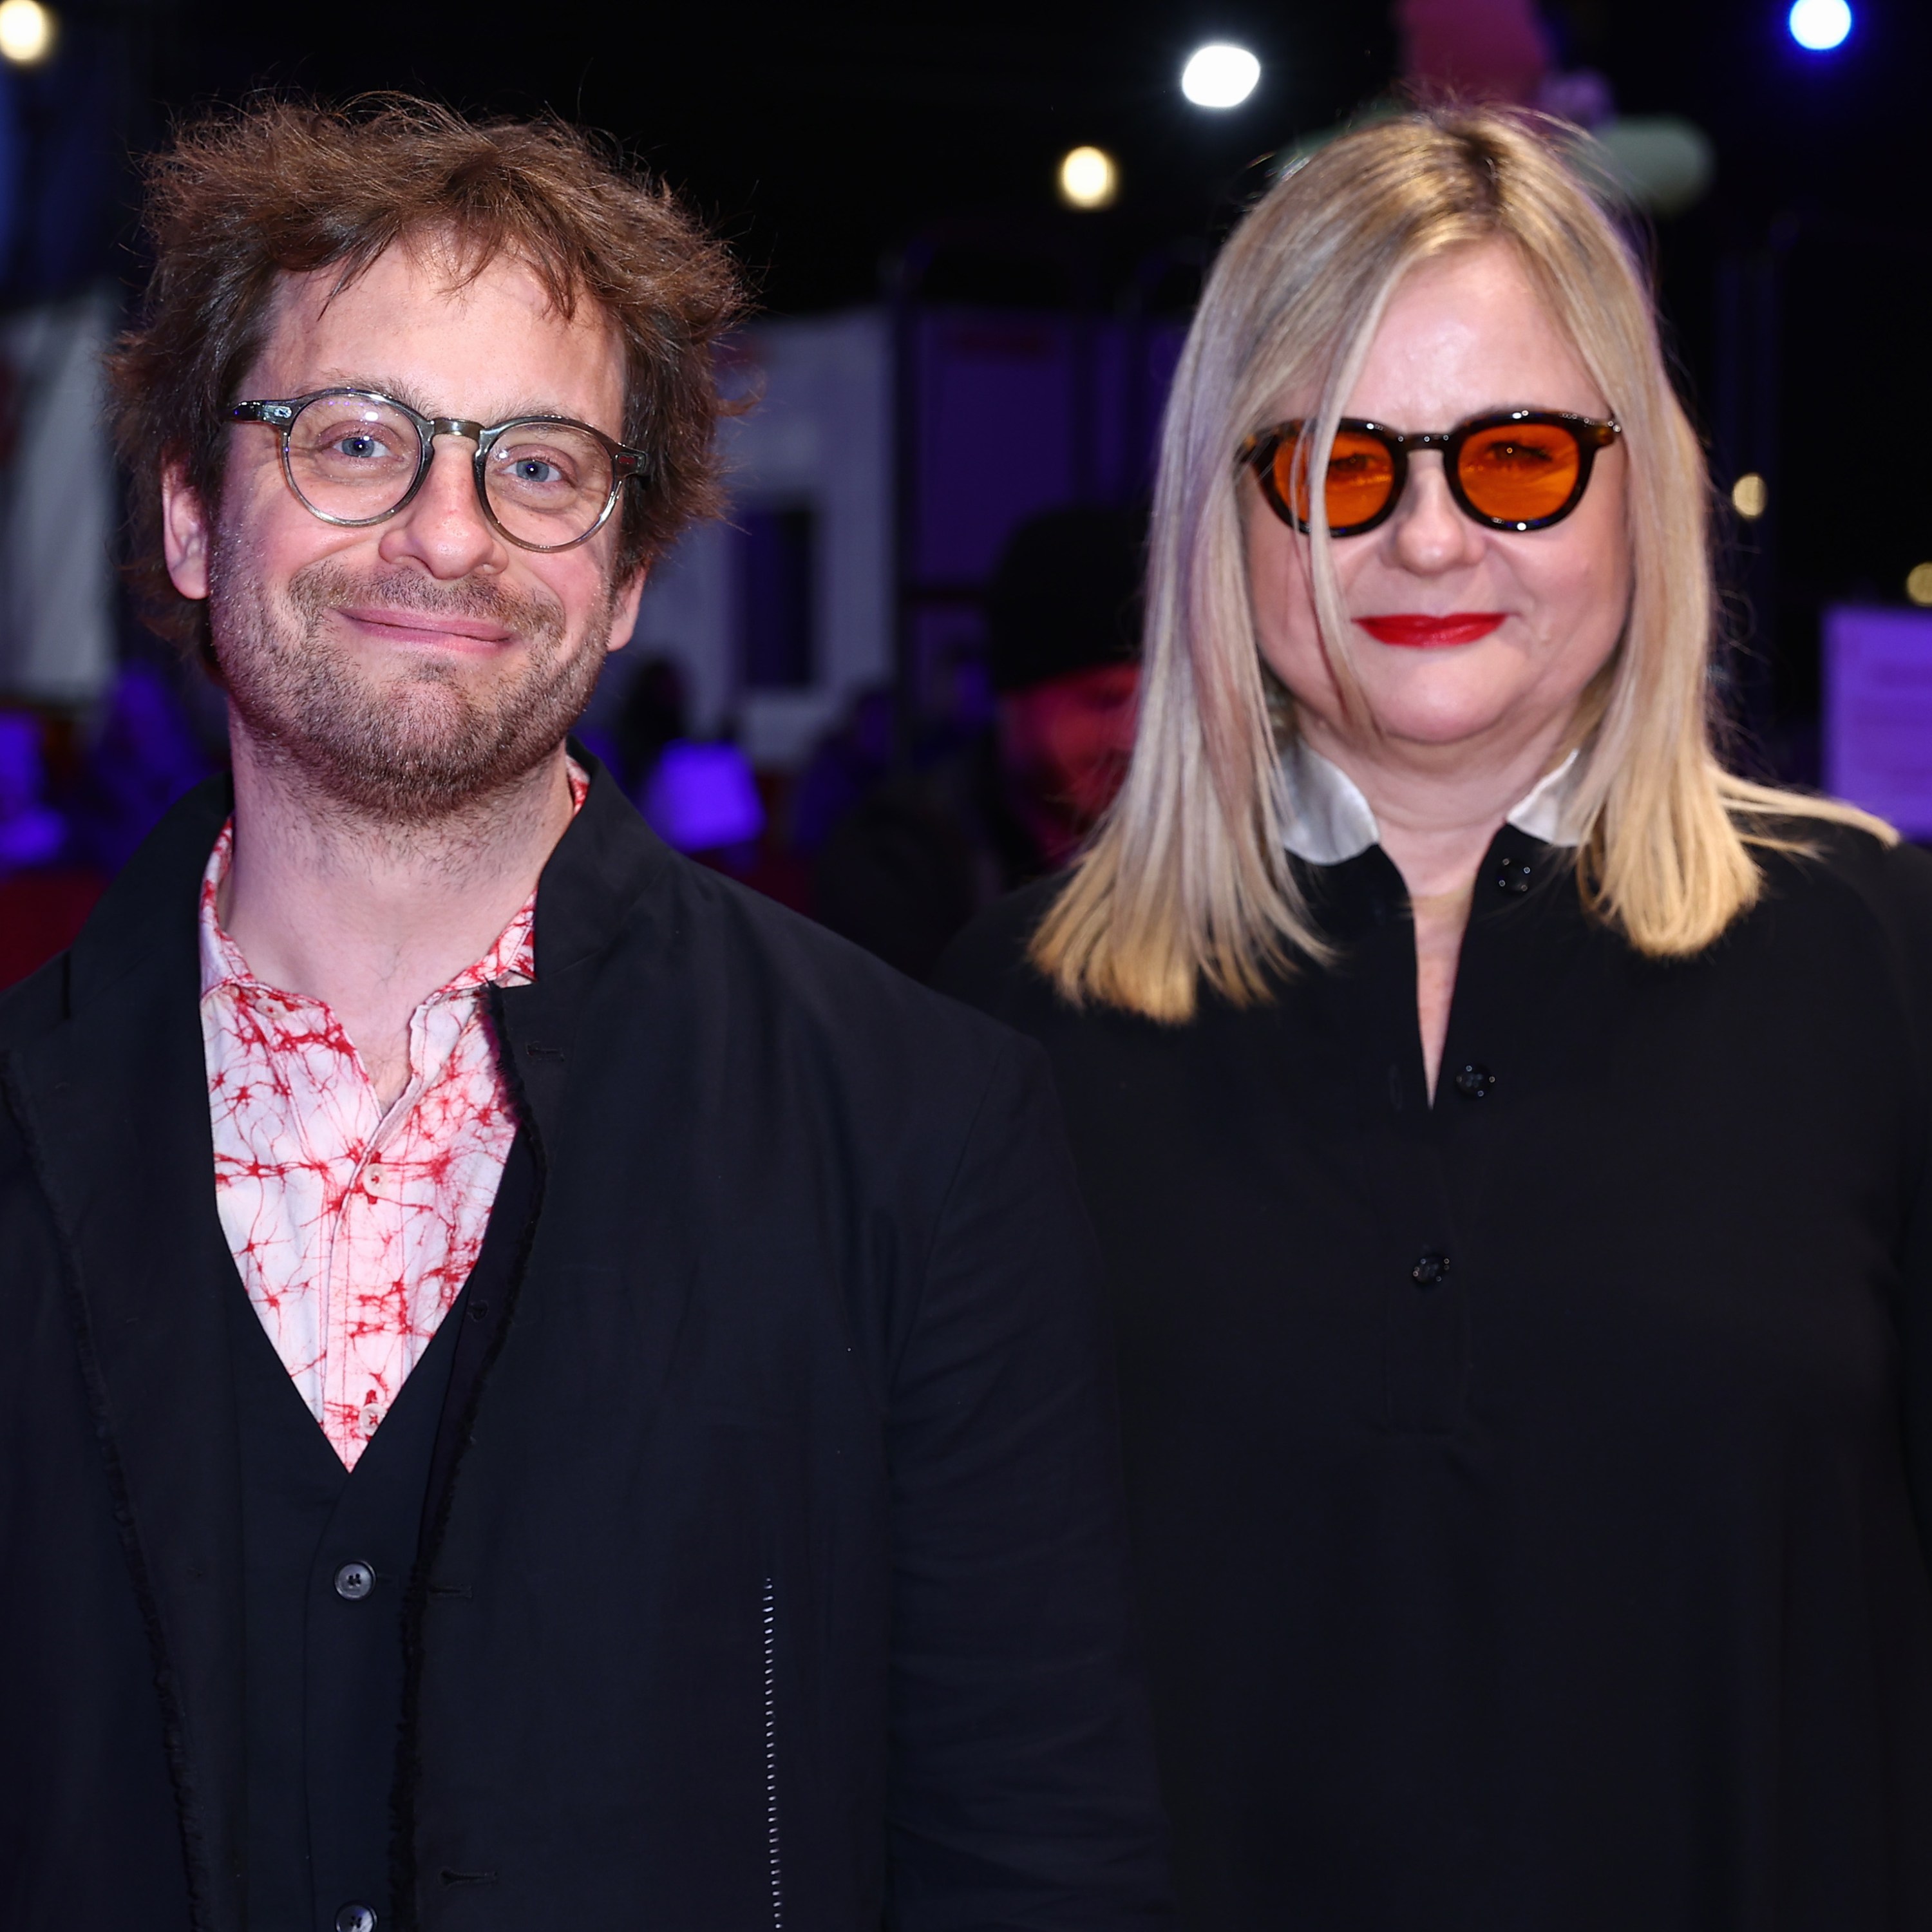 BERLIN, GERMANY - FEBRUARY 20: Severin Fiala and Veronika Franz attends the 'Devil's Bath' premiere during the 74th Berlinale International Film Festival Berlin at Berlinale Palast on February 20, 2024 in Berlin, Germany. (Photo by Sebastian Reuter/Getty Images)